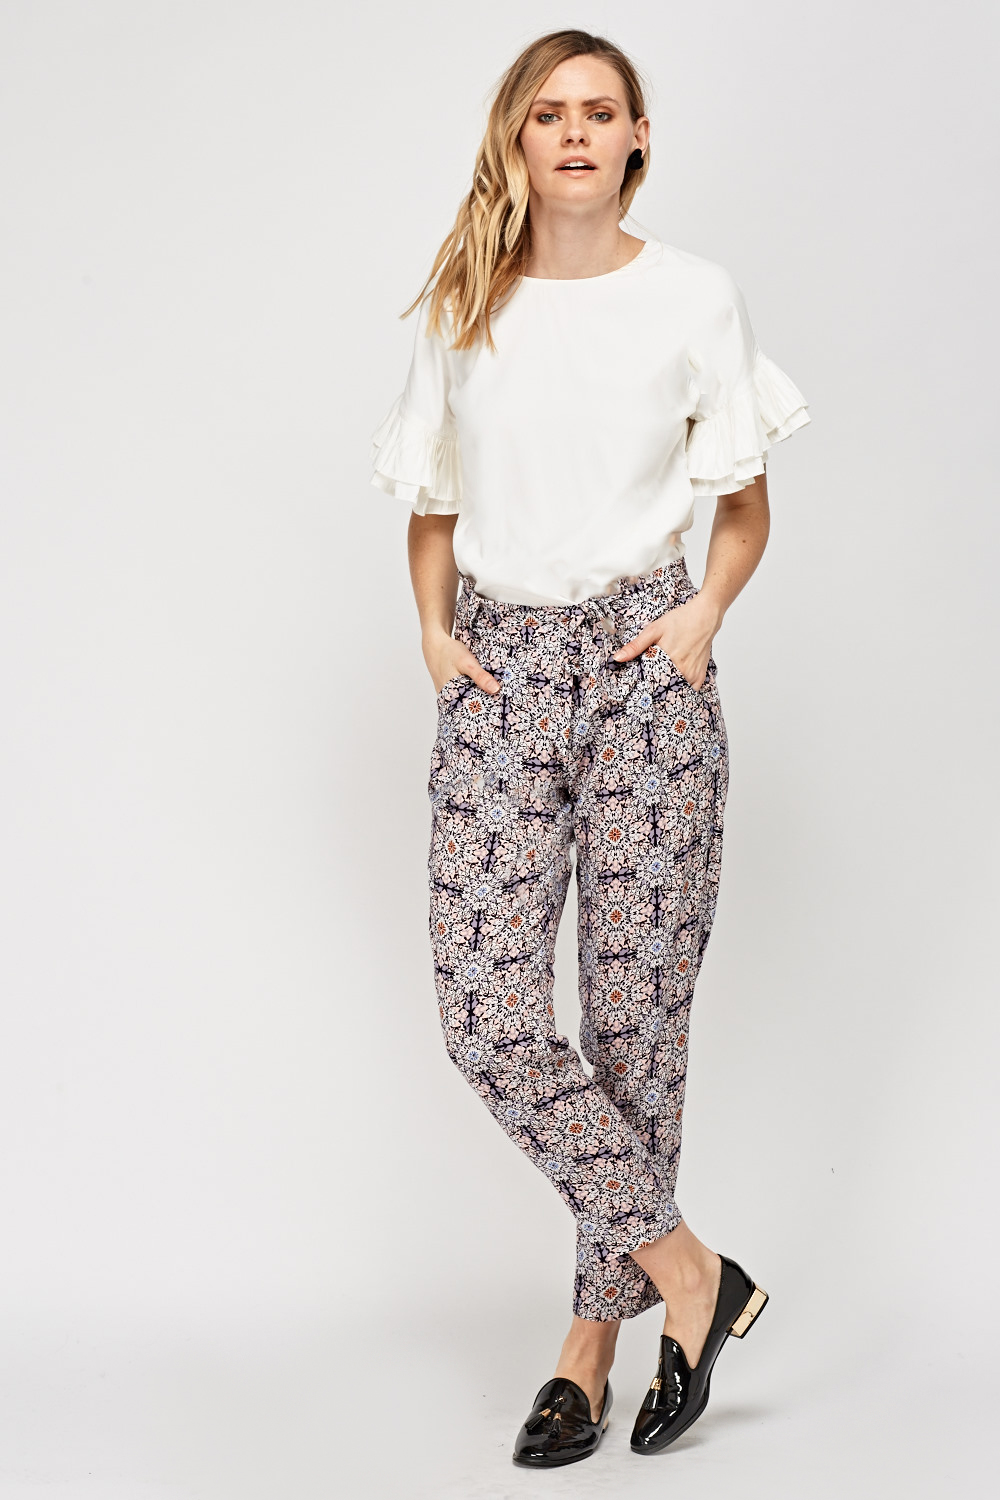 Mixed Floral Printed Trousers - Just $7